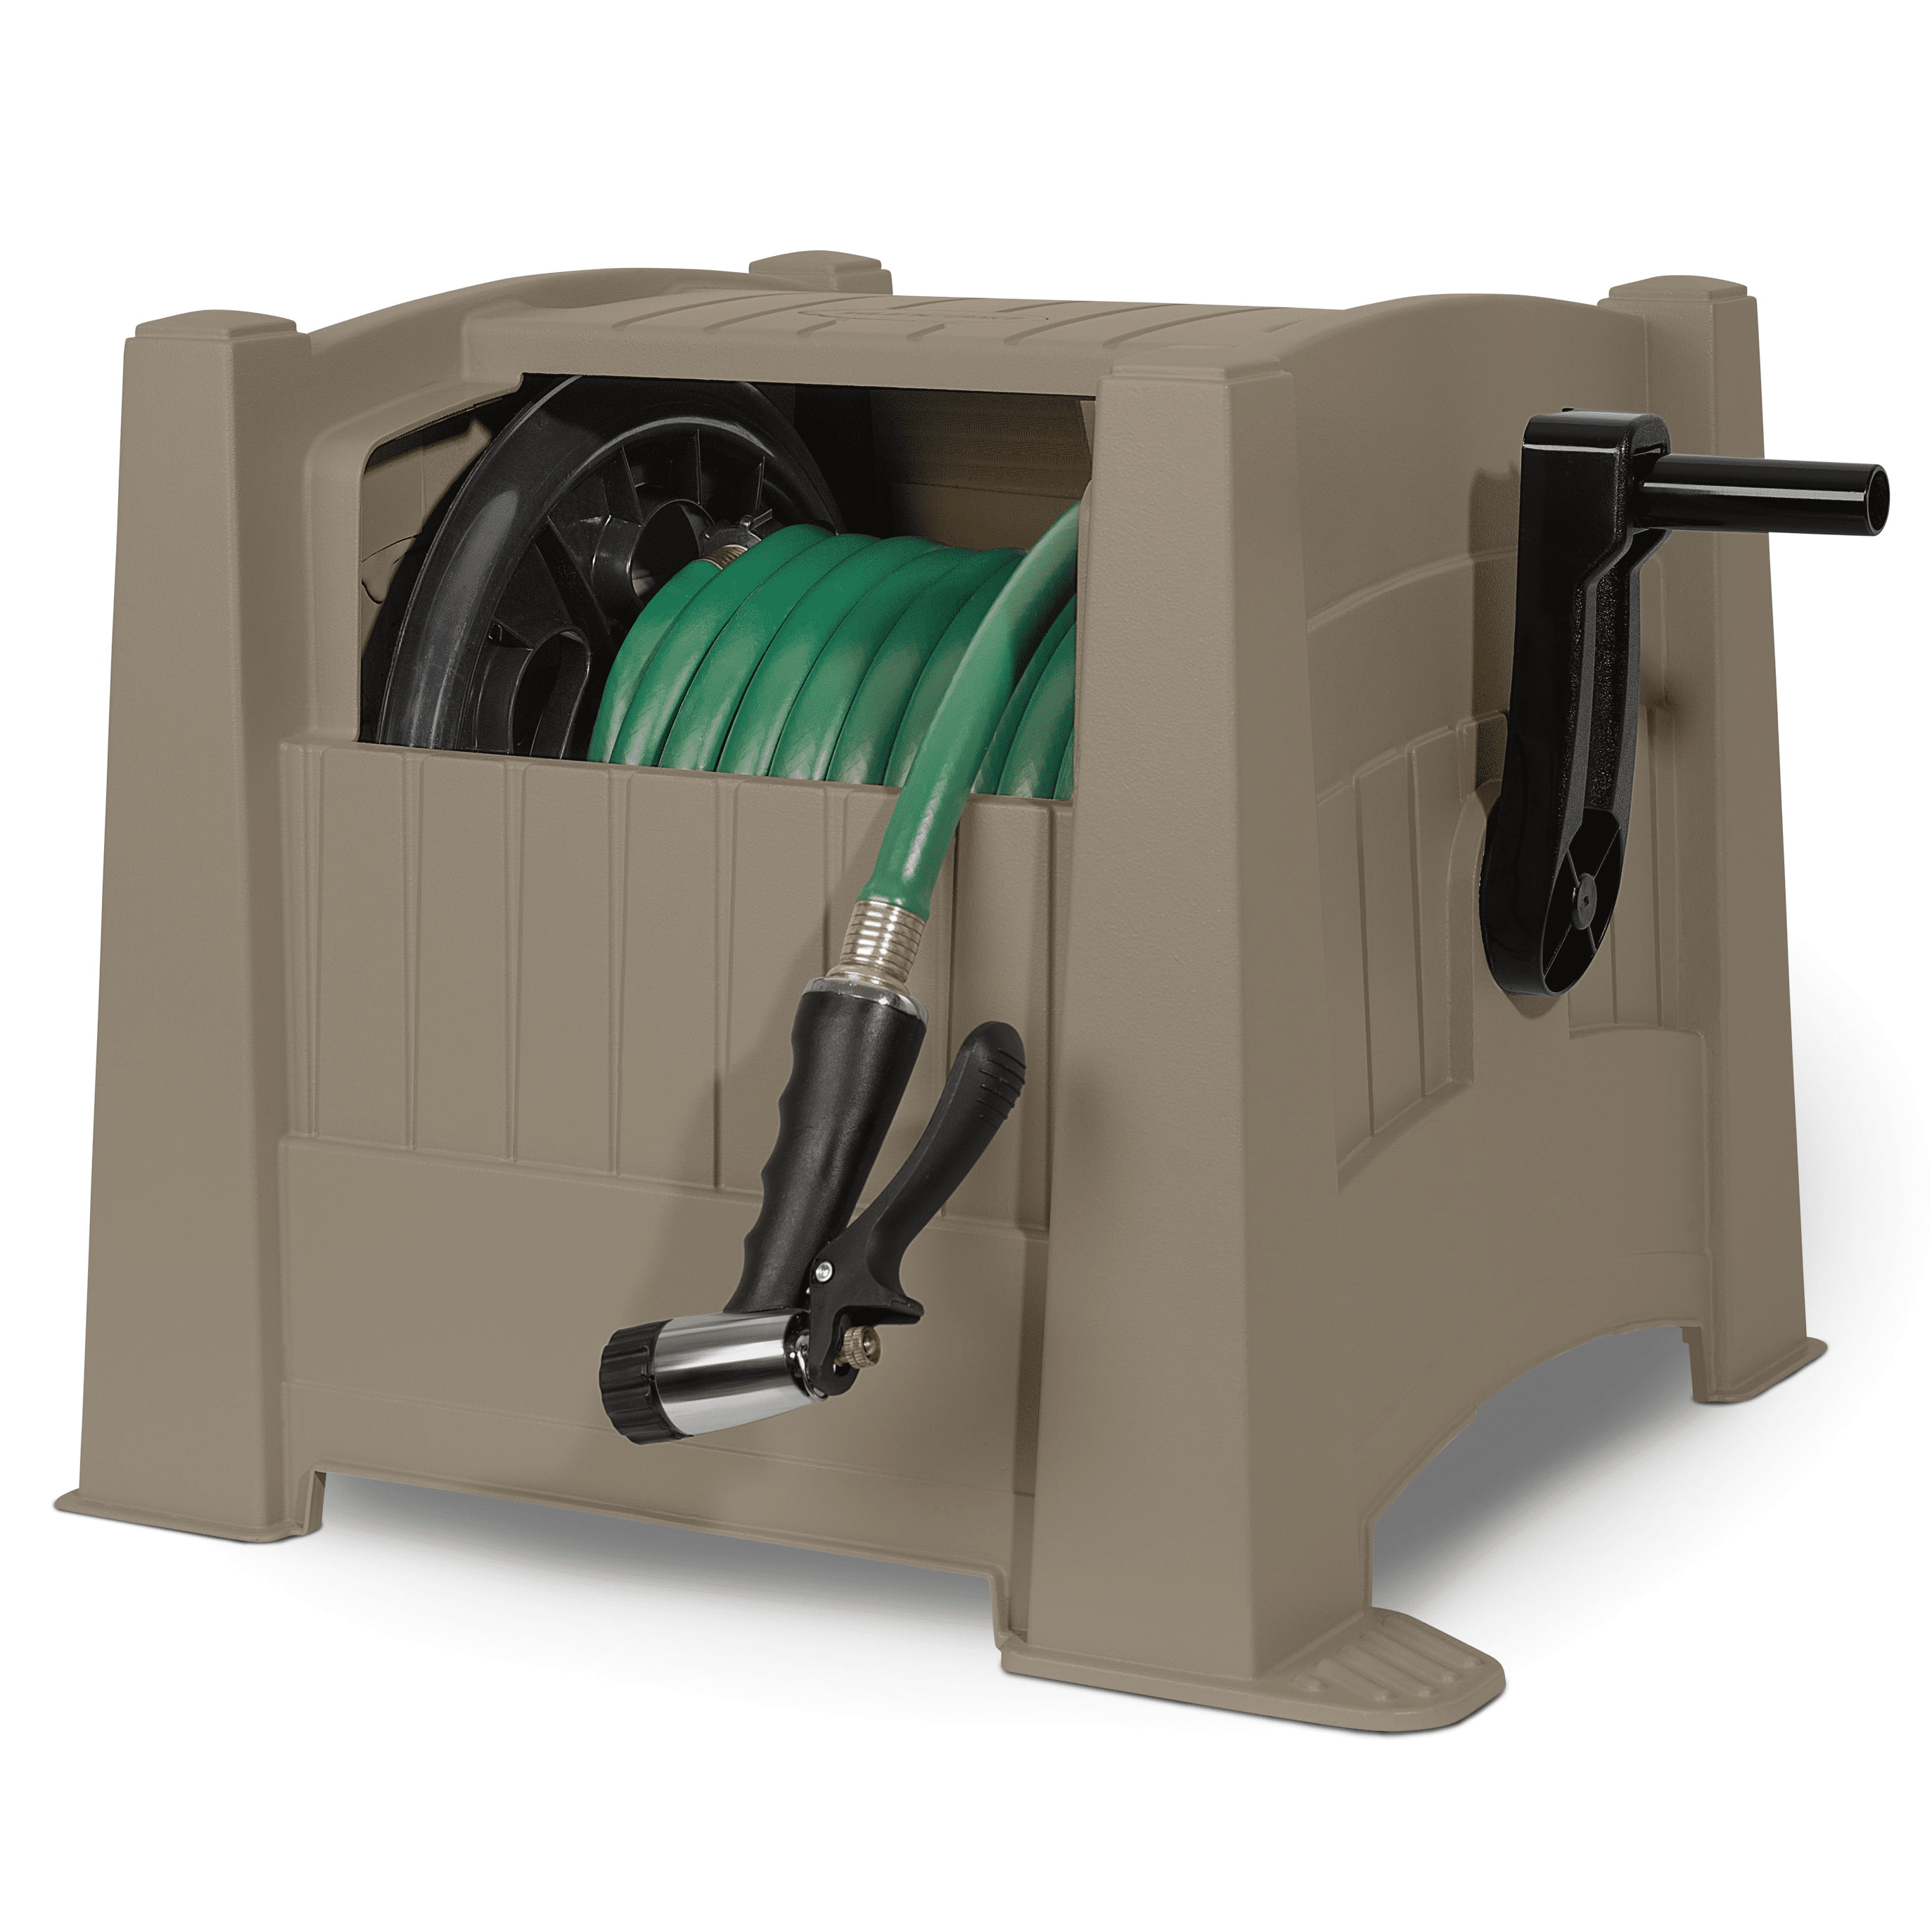 Garden Hose Reel Cart Suncast CPLPPJ100DT Hideaway with 100-Foot Hose  Capacity, Heavy Duty Resin Portable. Perfect for Patio & Poolside Cleaning